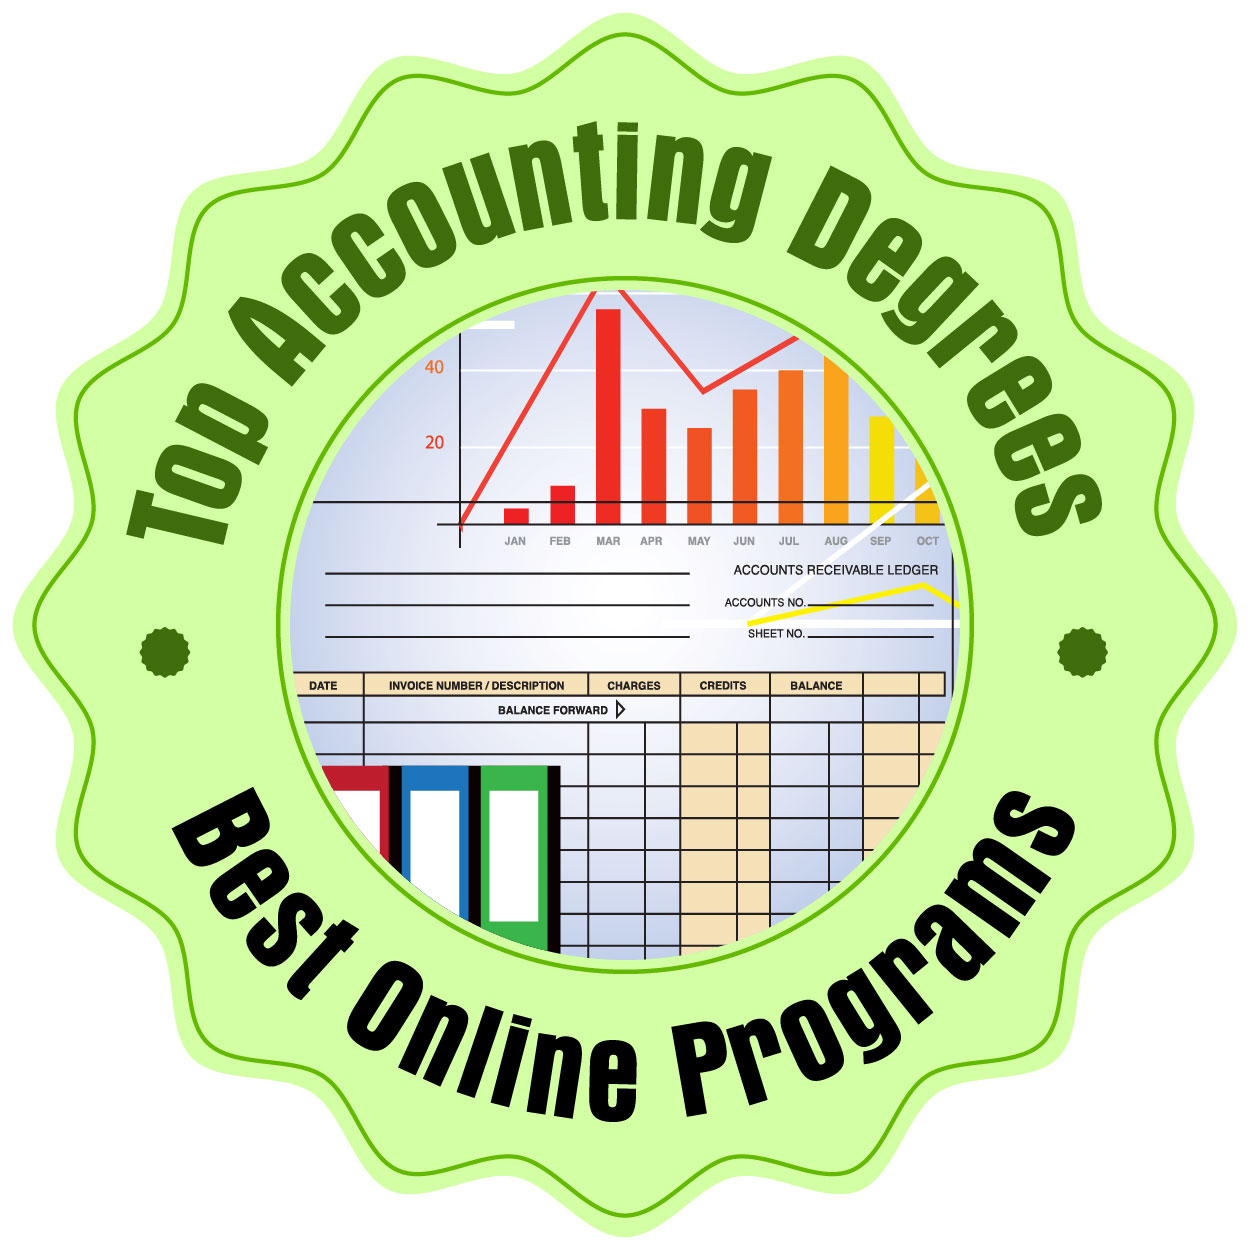 accounting careers with an associate''s degree